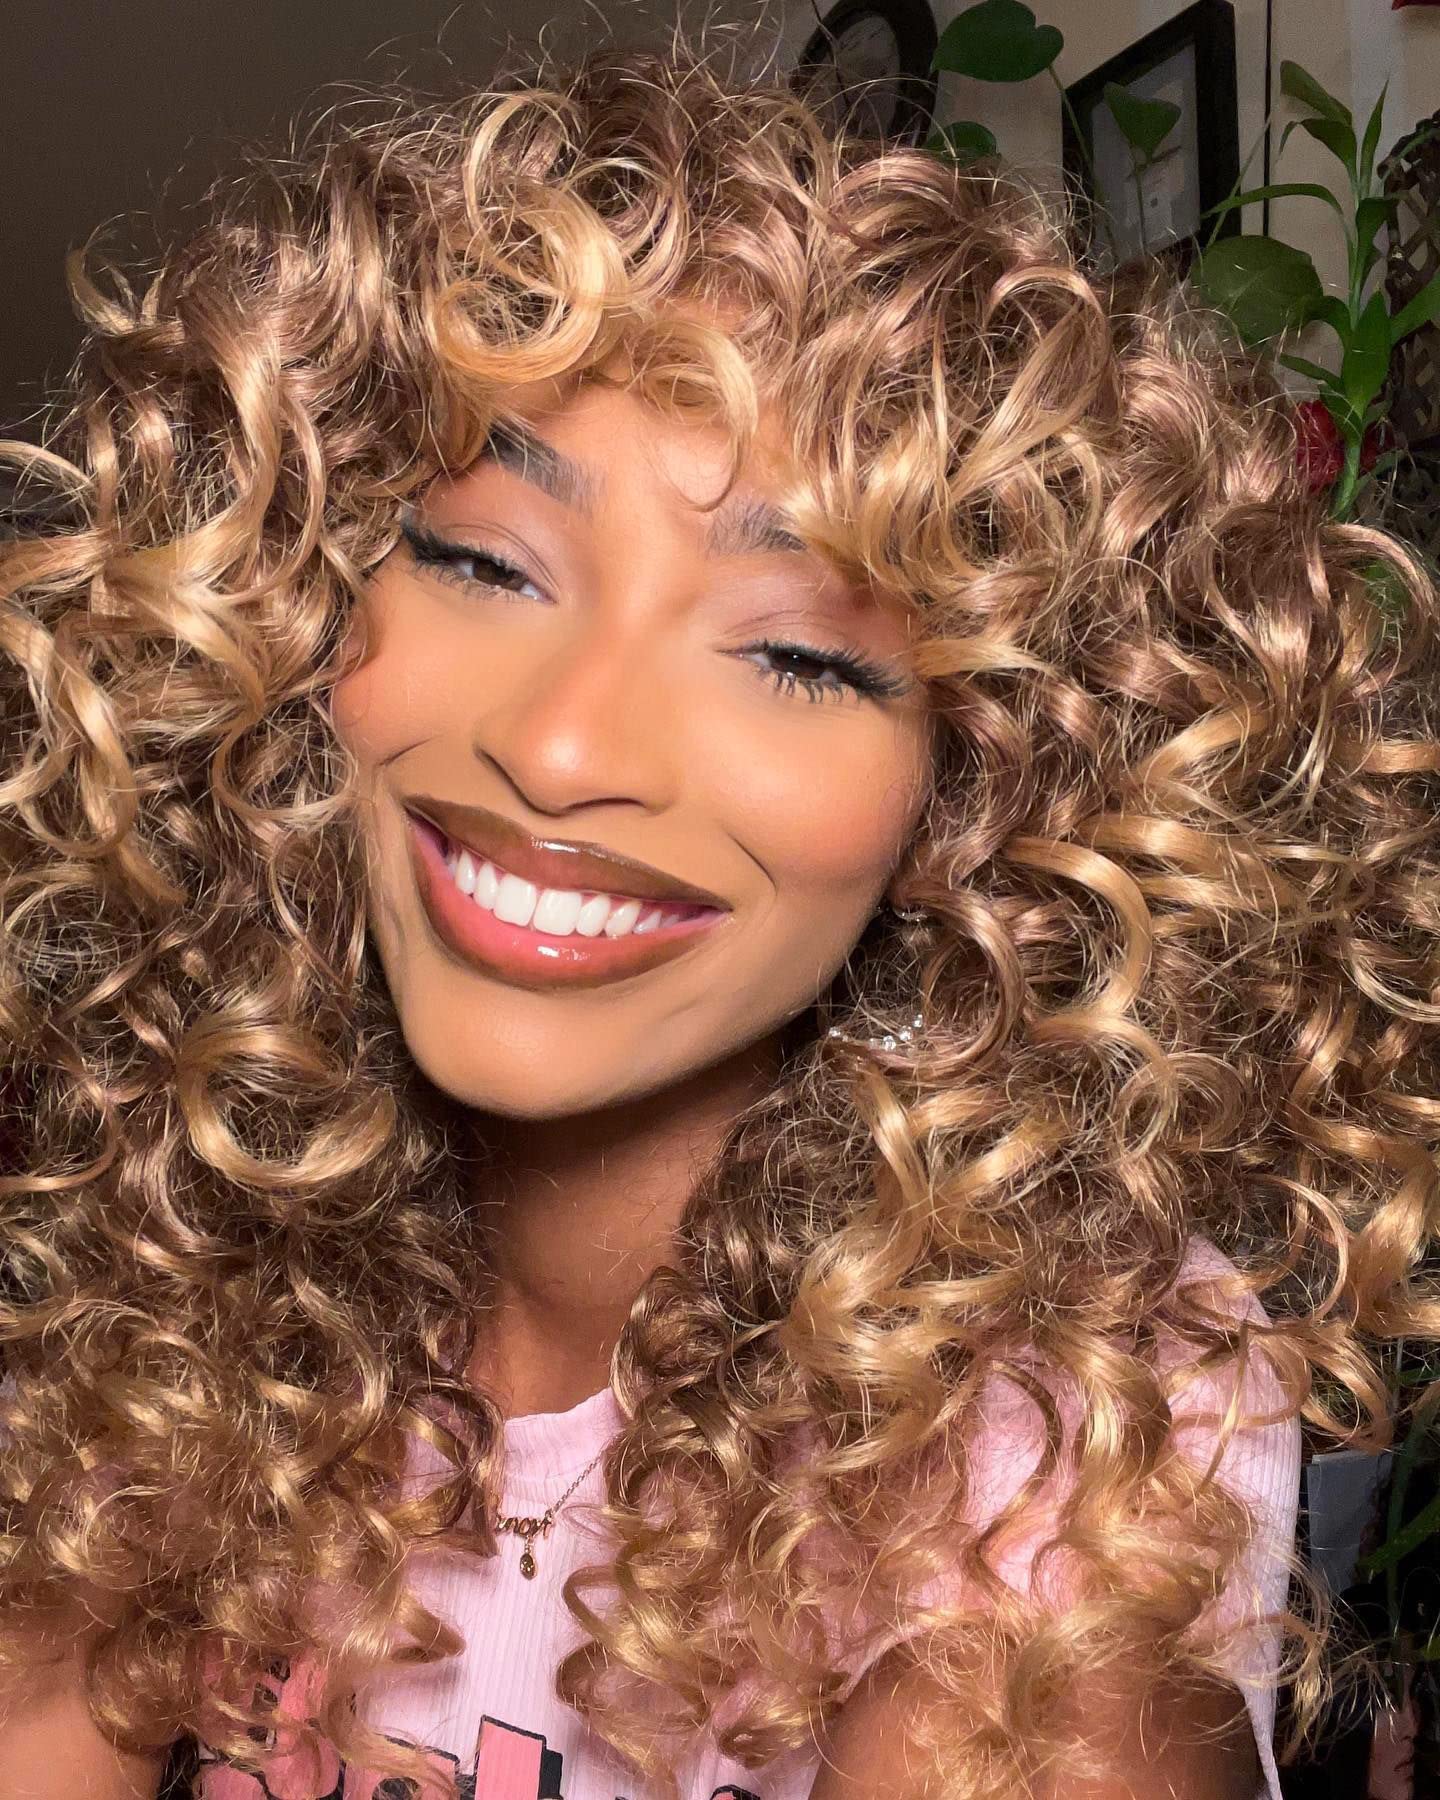 Annivia Curly Wig with Bangs for Black Women Ombre Blonde Kinky Long Curly Shag Synthetic Hair Wigs Daily Use Cosplay 17 Inch